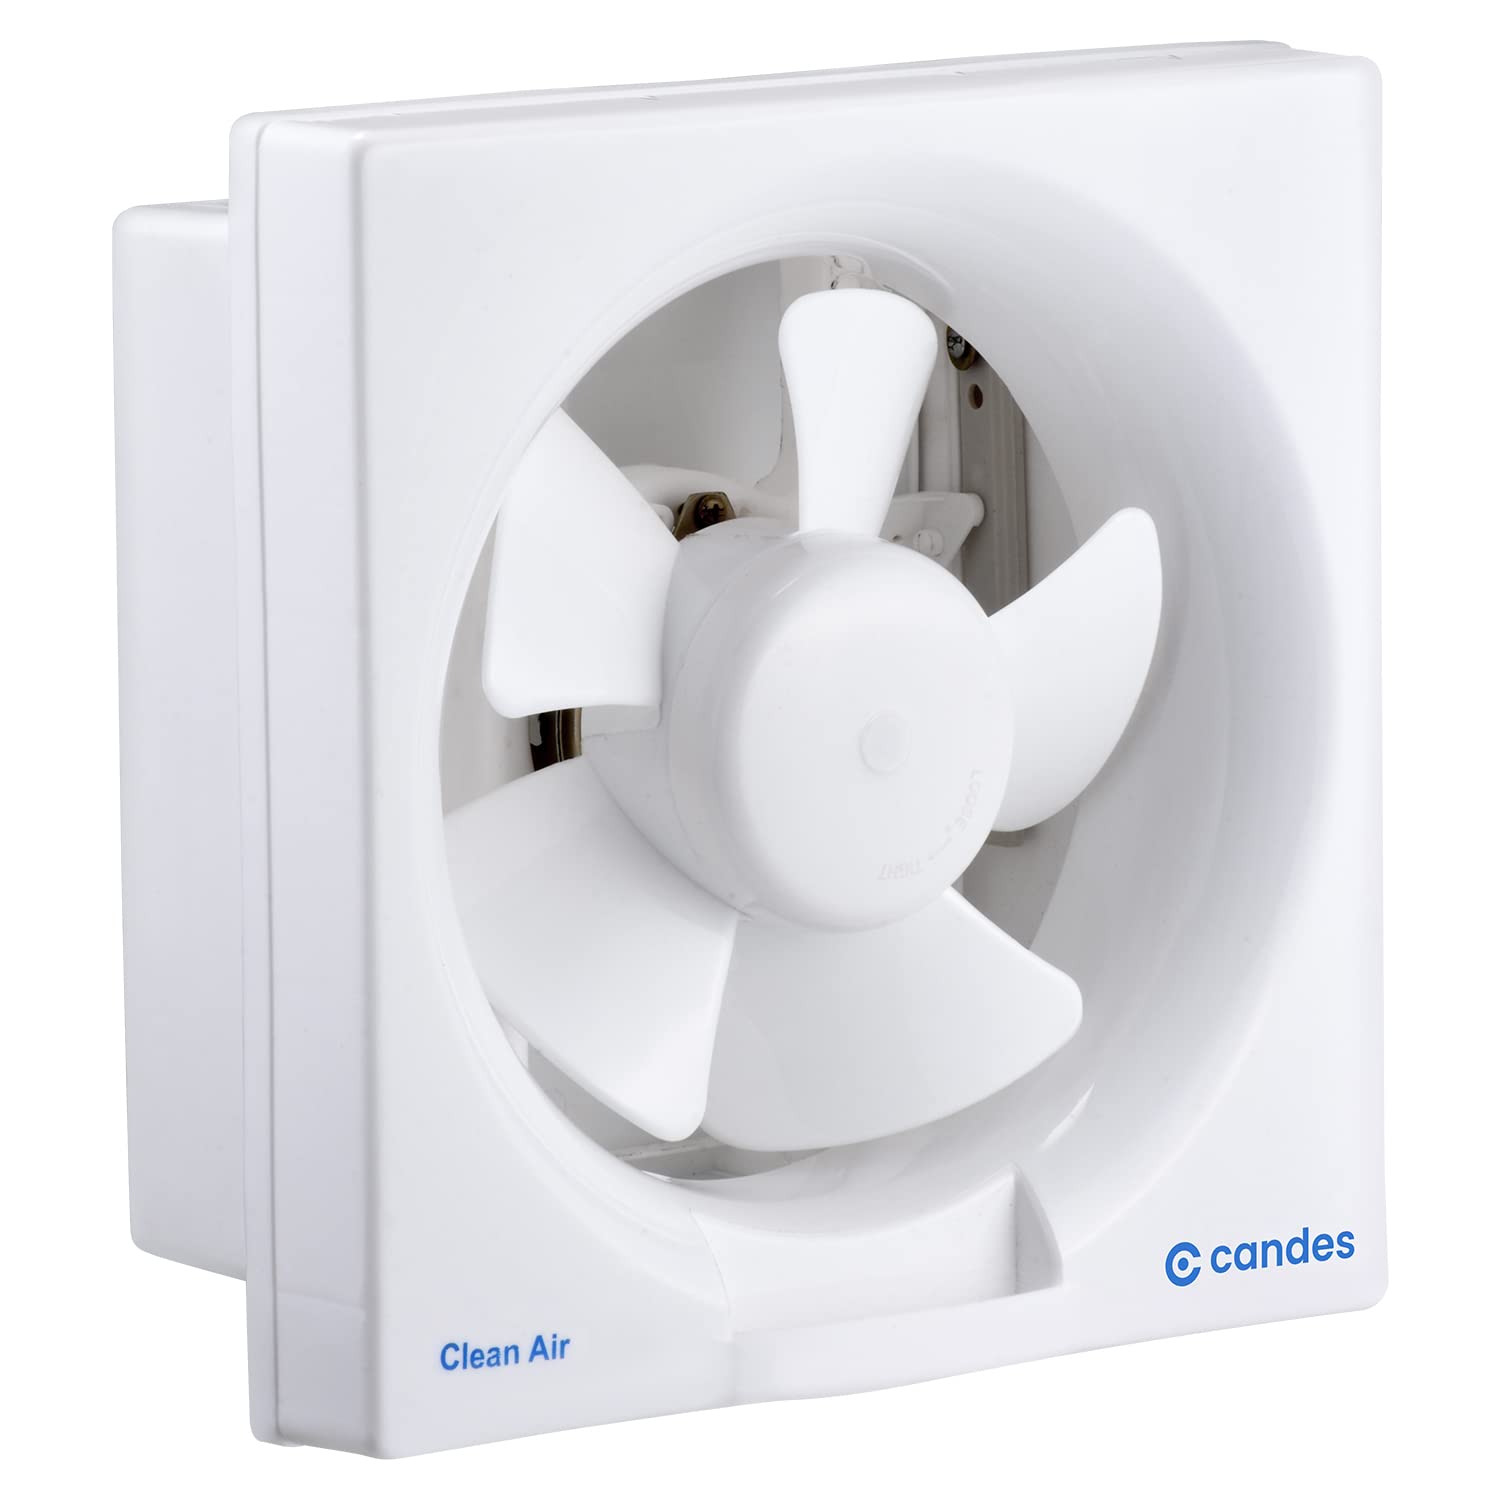 Candes Vento 250 MM (10 Inches) 100% CNC Winding 5 Blades Exhaust Fan - 1 Year Warranty (White)